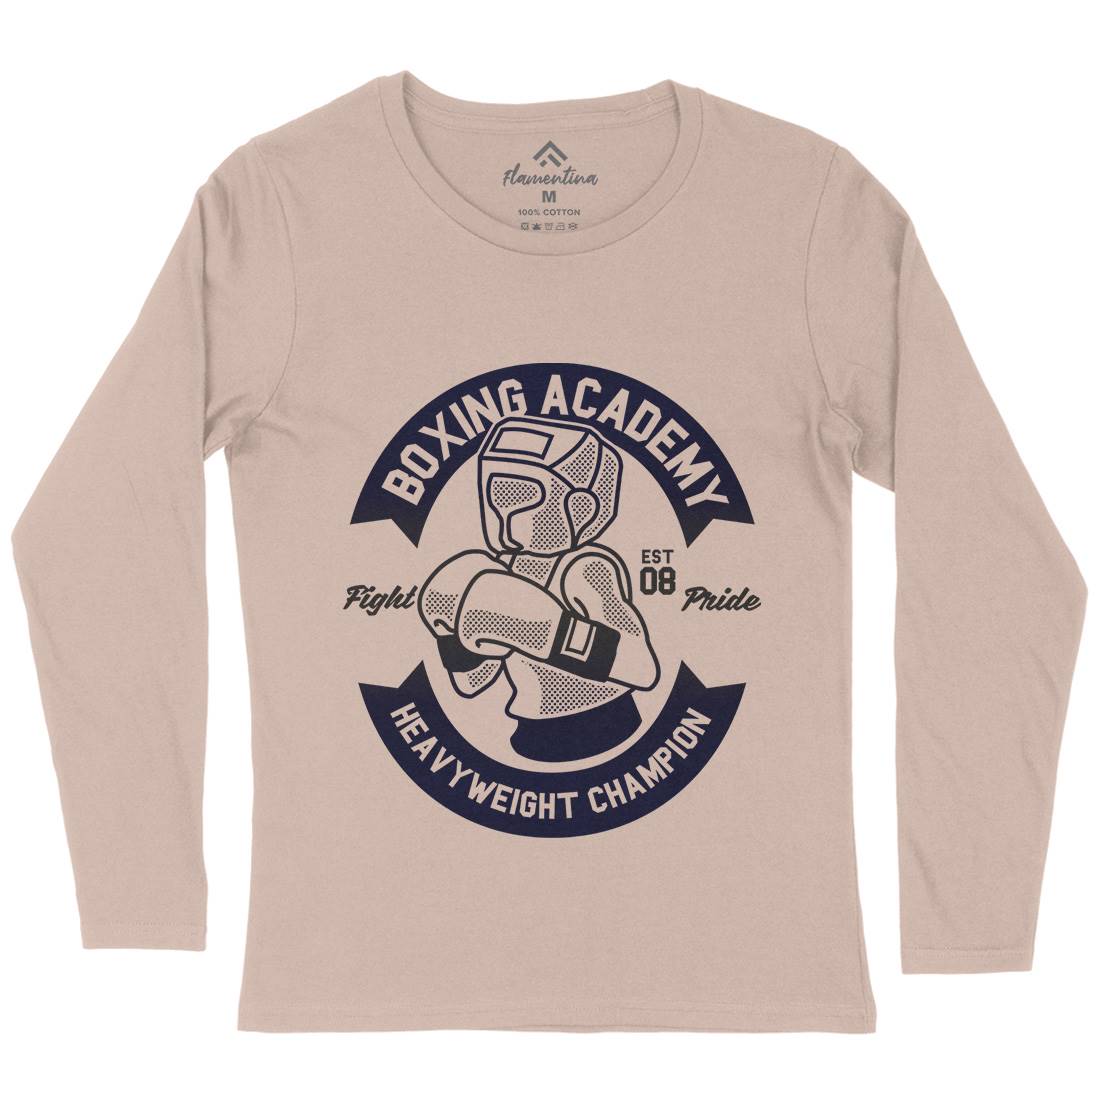 Boxing Academy Womens Long Sleeve T-Shirt Gym A213